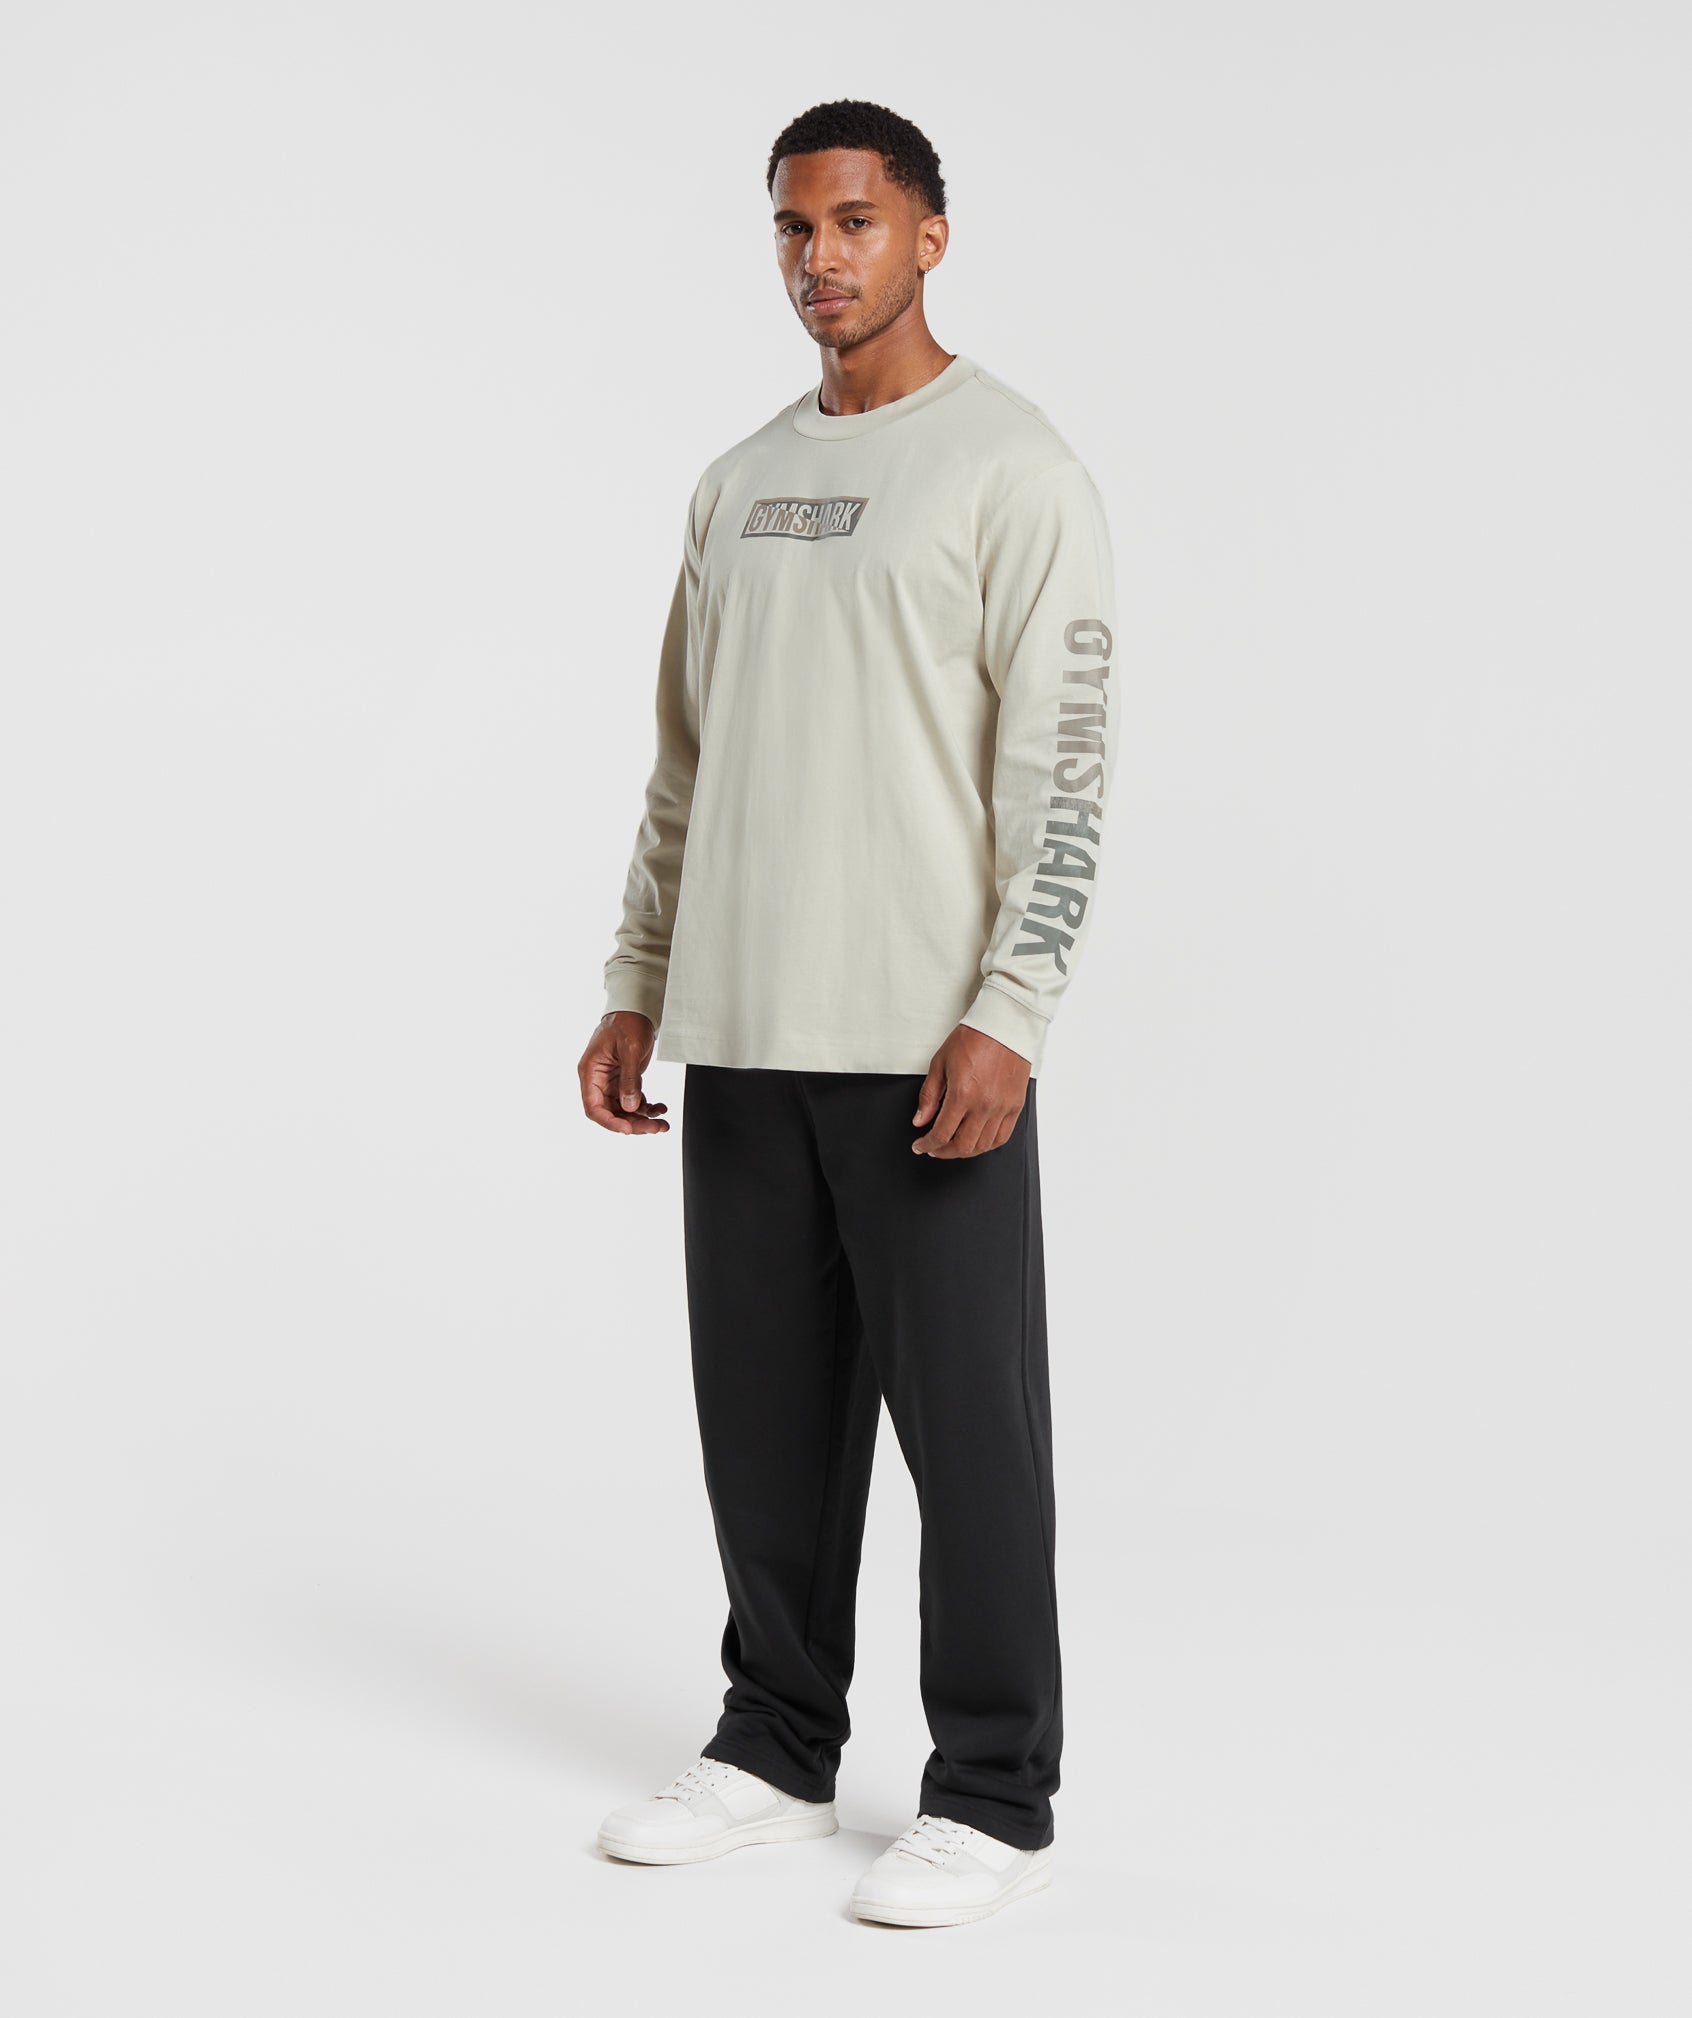 Global Graphic Long Sleeve T-Shirt in Pebble Grey - view 4